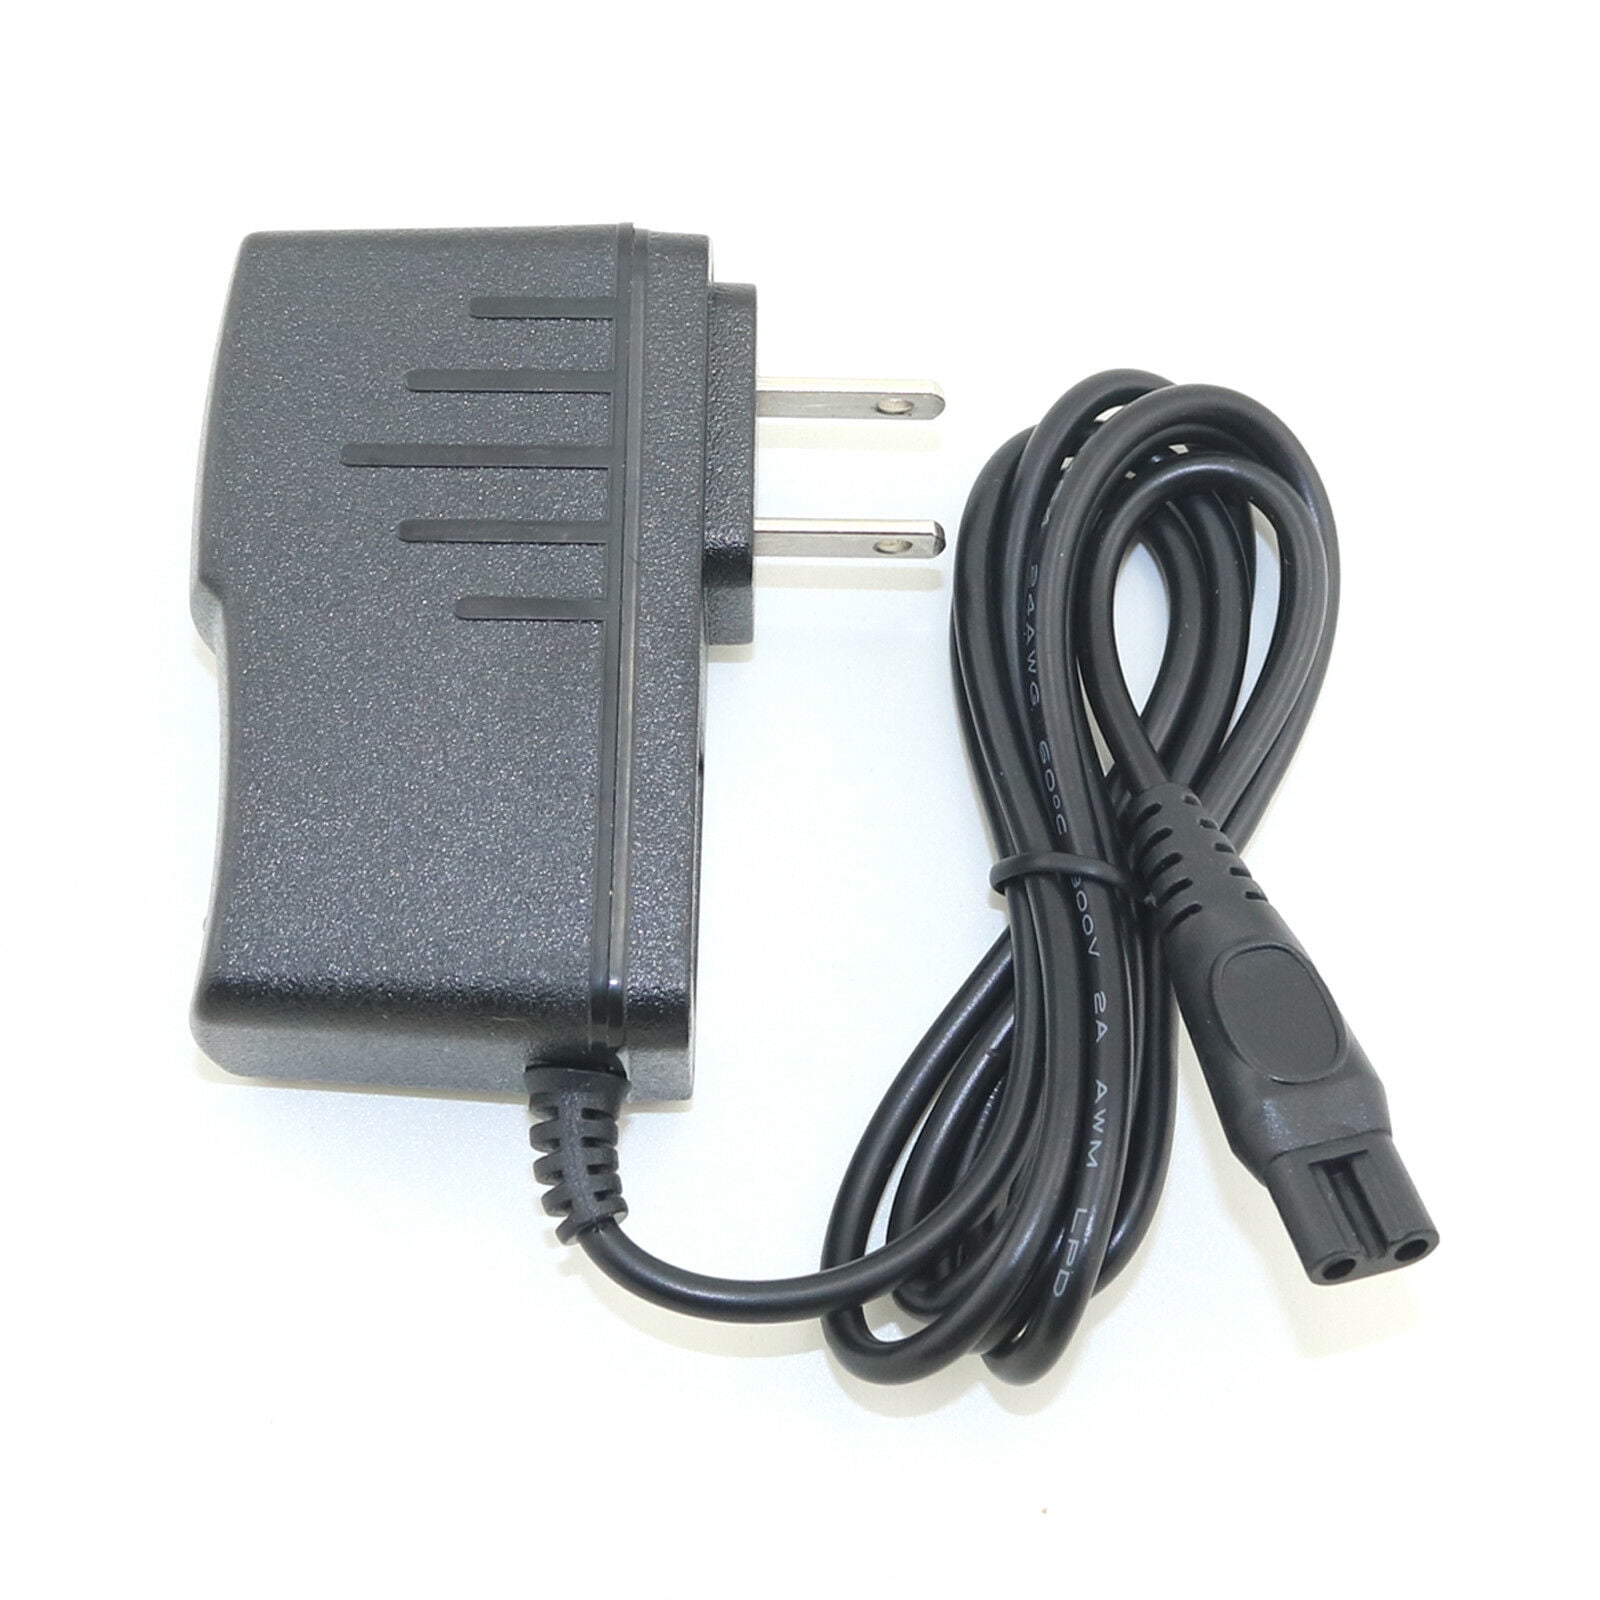 FYL AC Adapter Charger Cord for Philips Norelco Quadra HQ6894 HQ6890 HQ7780 HQ6885 